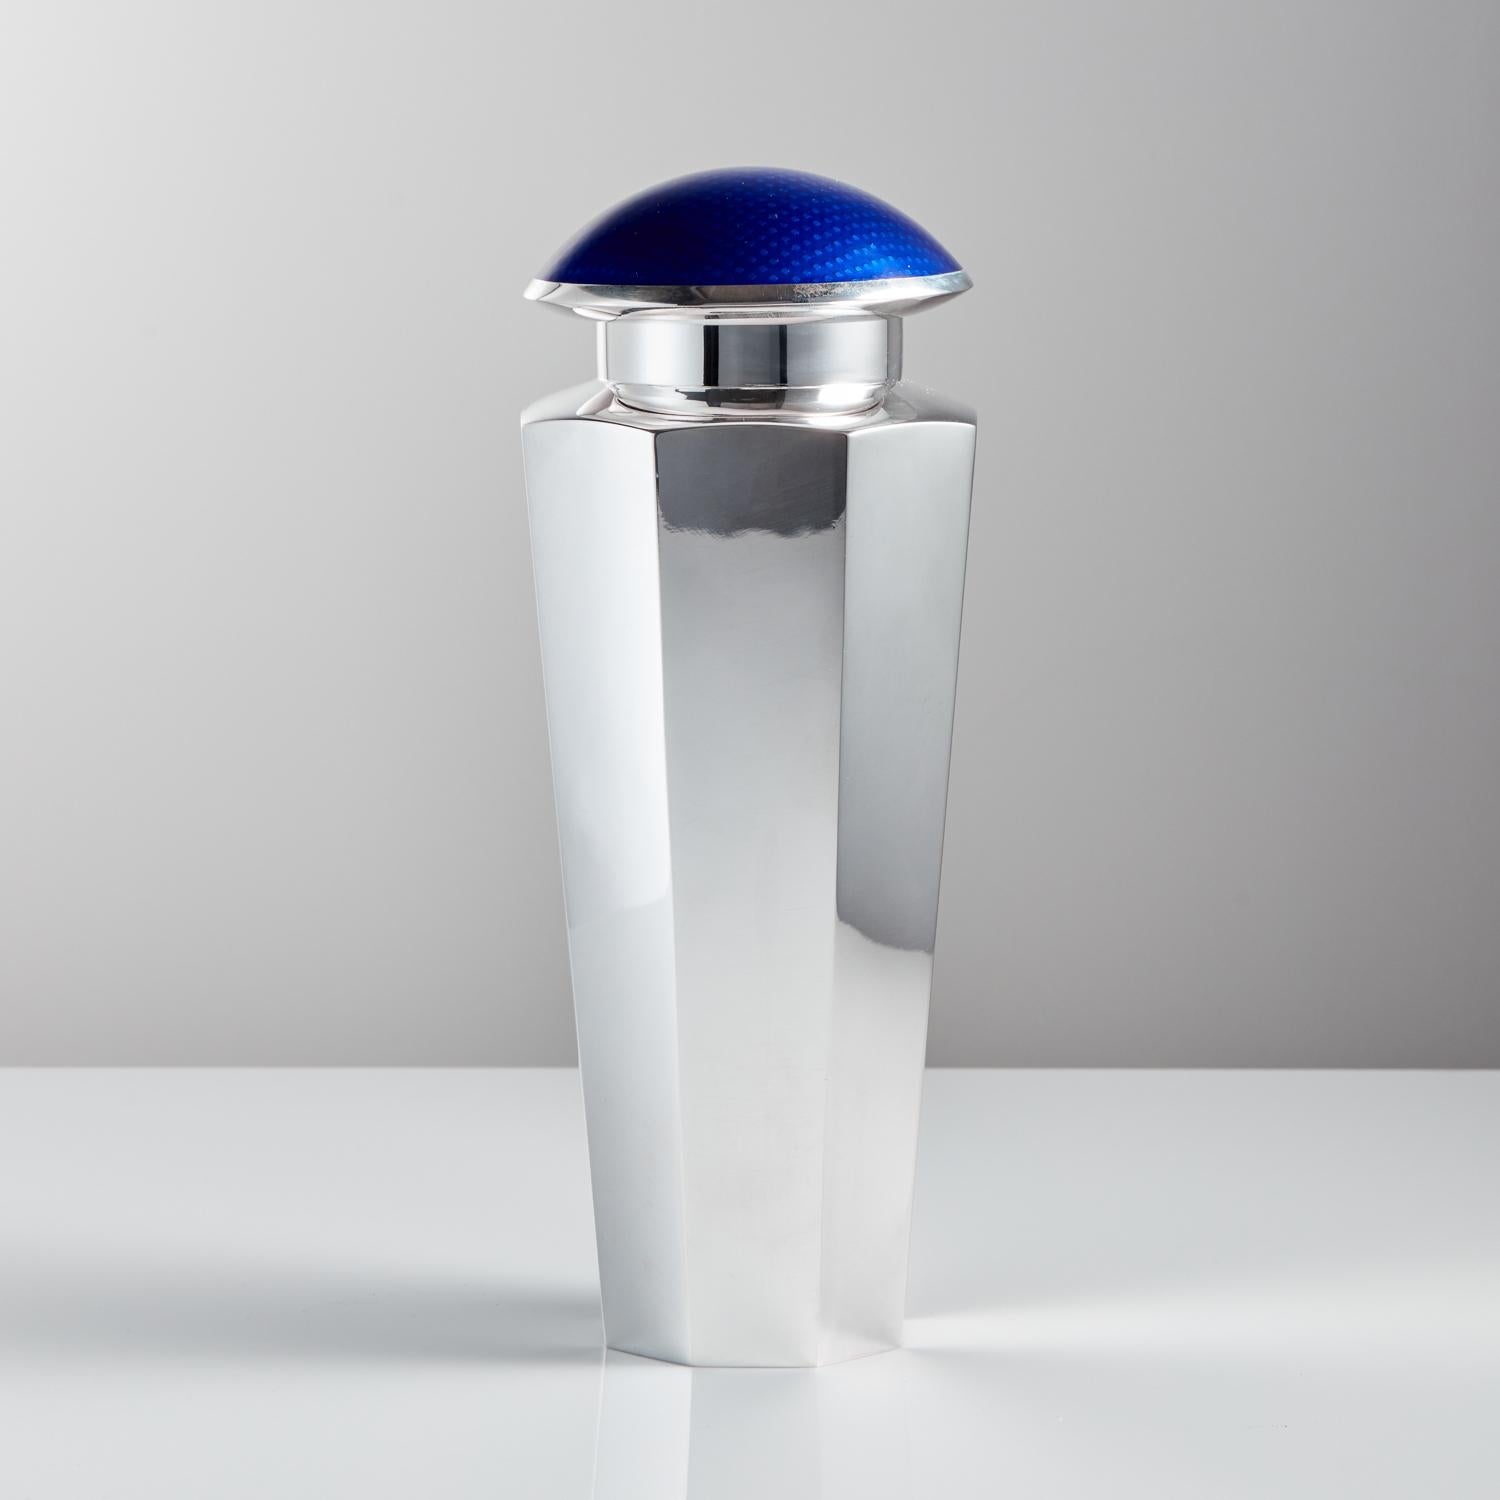 Mid-20th Century Sterling Silver & Enamel Cocktail Shaker J Tostrup, circa 1950 5